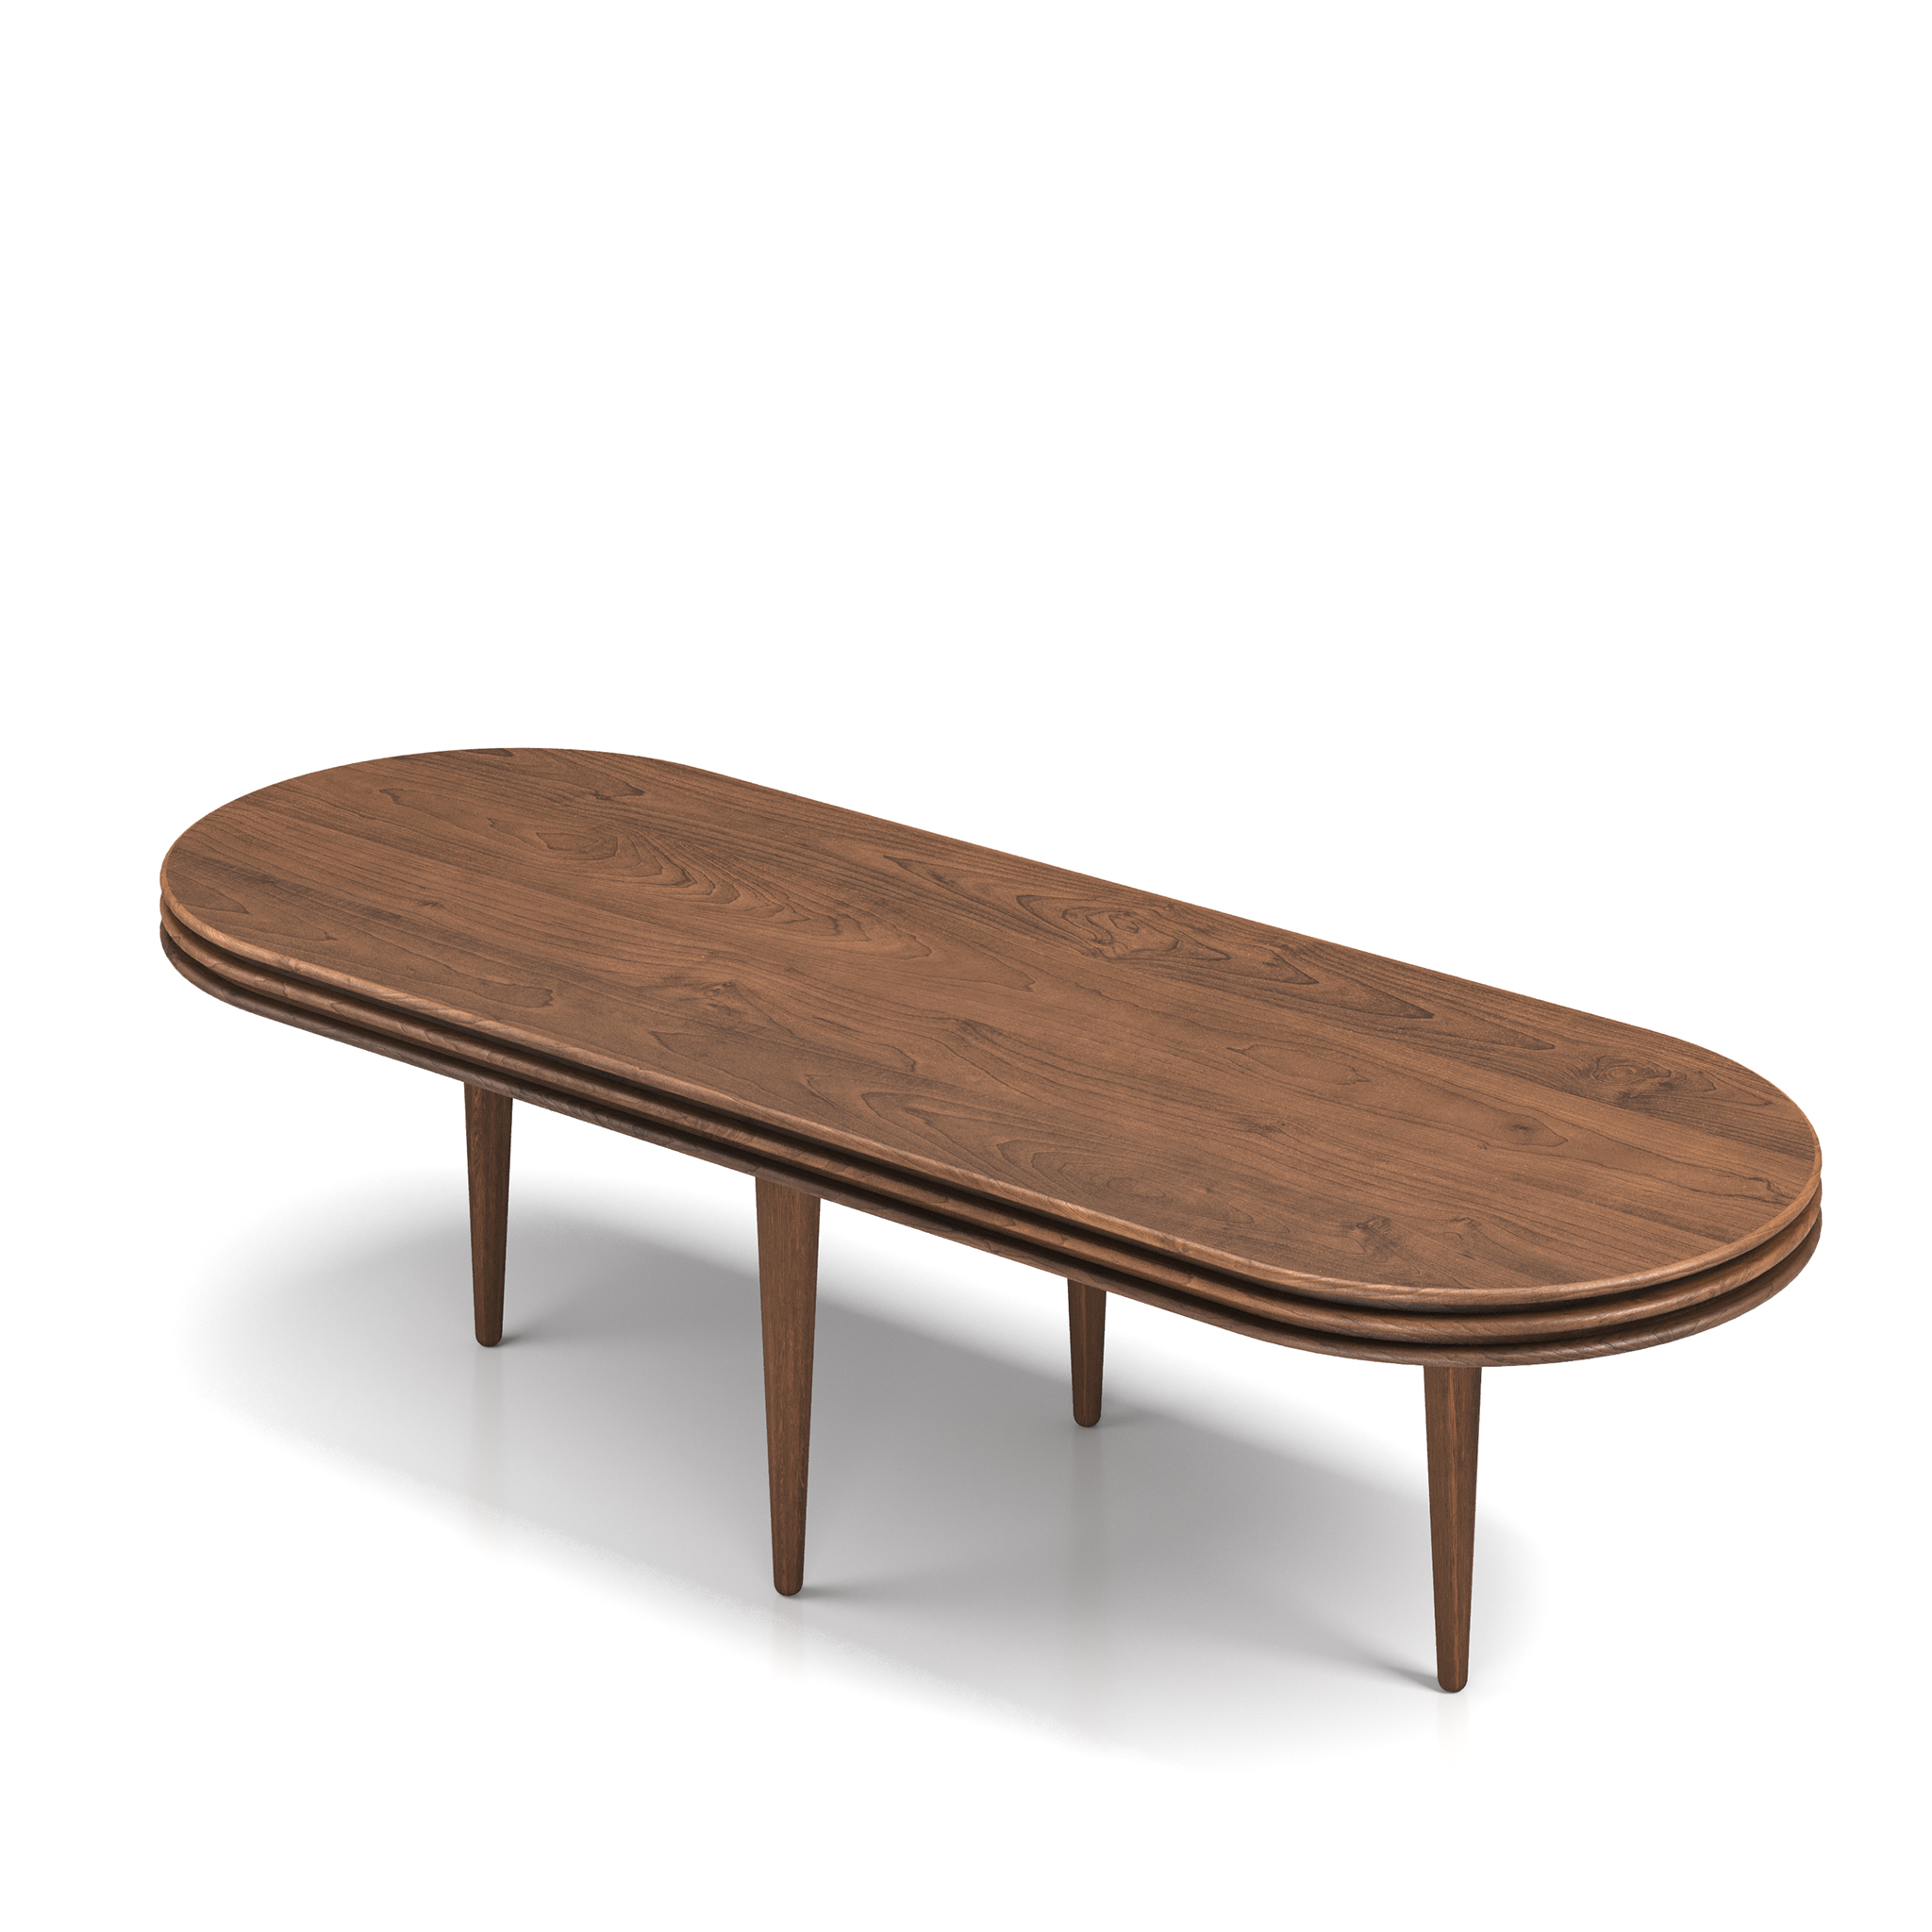 Groove Oval Coffee Table by Christian Troels for DK3